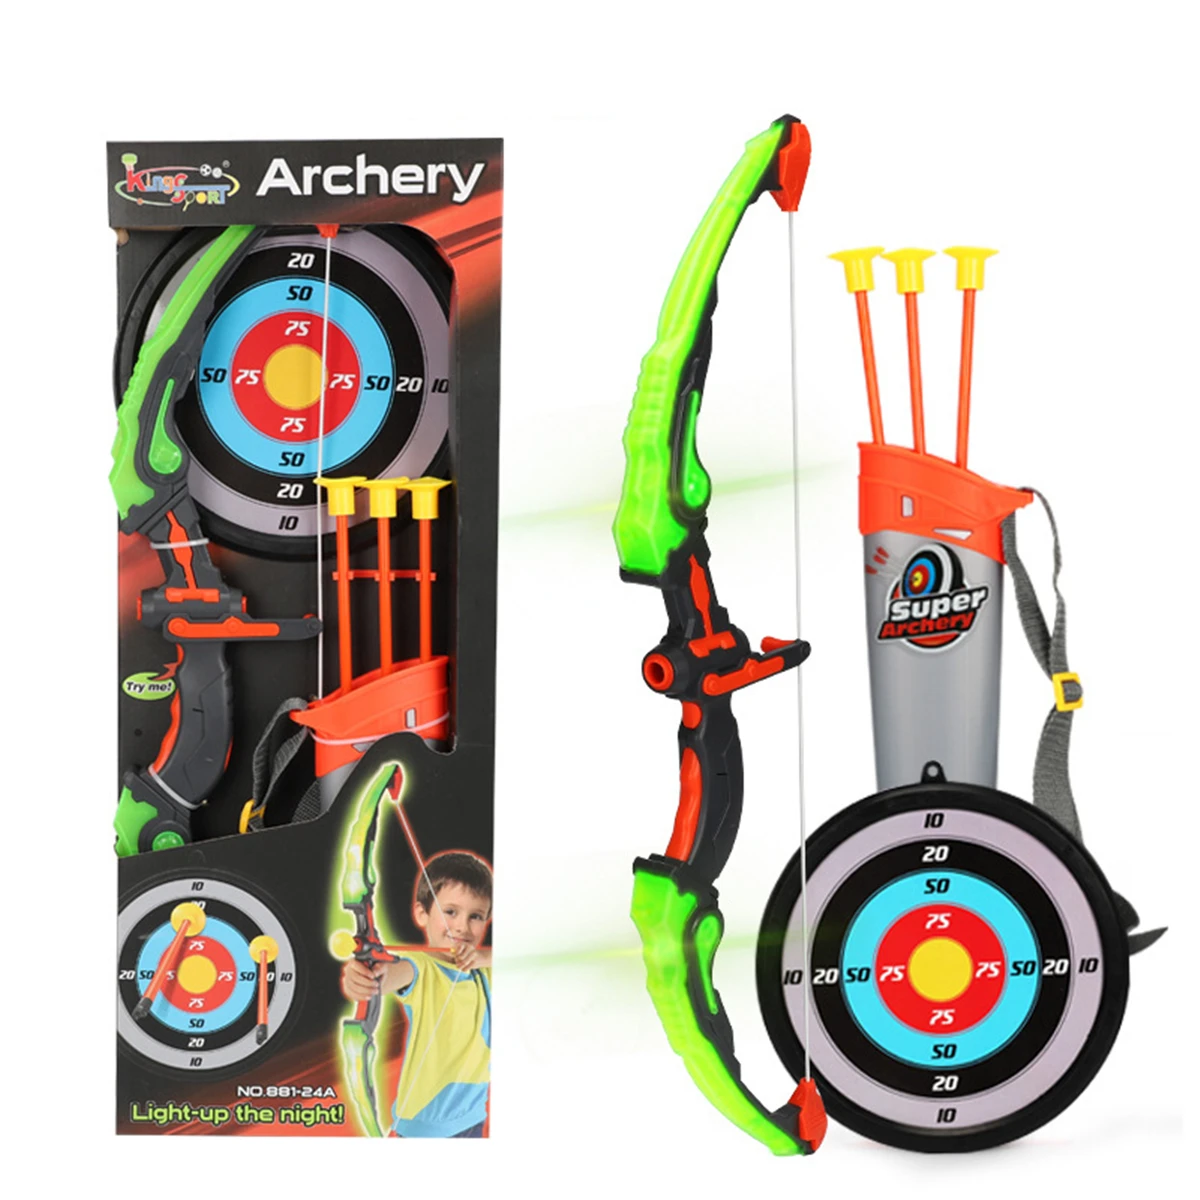 2 in 1 Target and Quiver Toys for Kids 6-12 Years Old 8 Suction Cups Arrows Rose Red Upgrade Archery Set Includes 1 Super Bow Doloowee Bow and Arrow for Kids with LED Lights